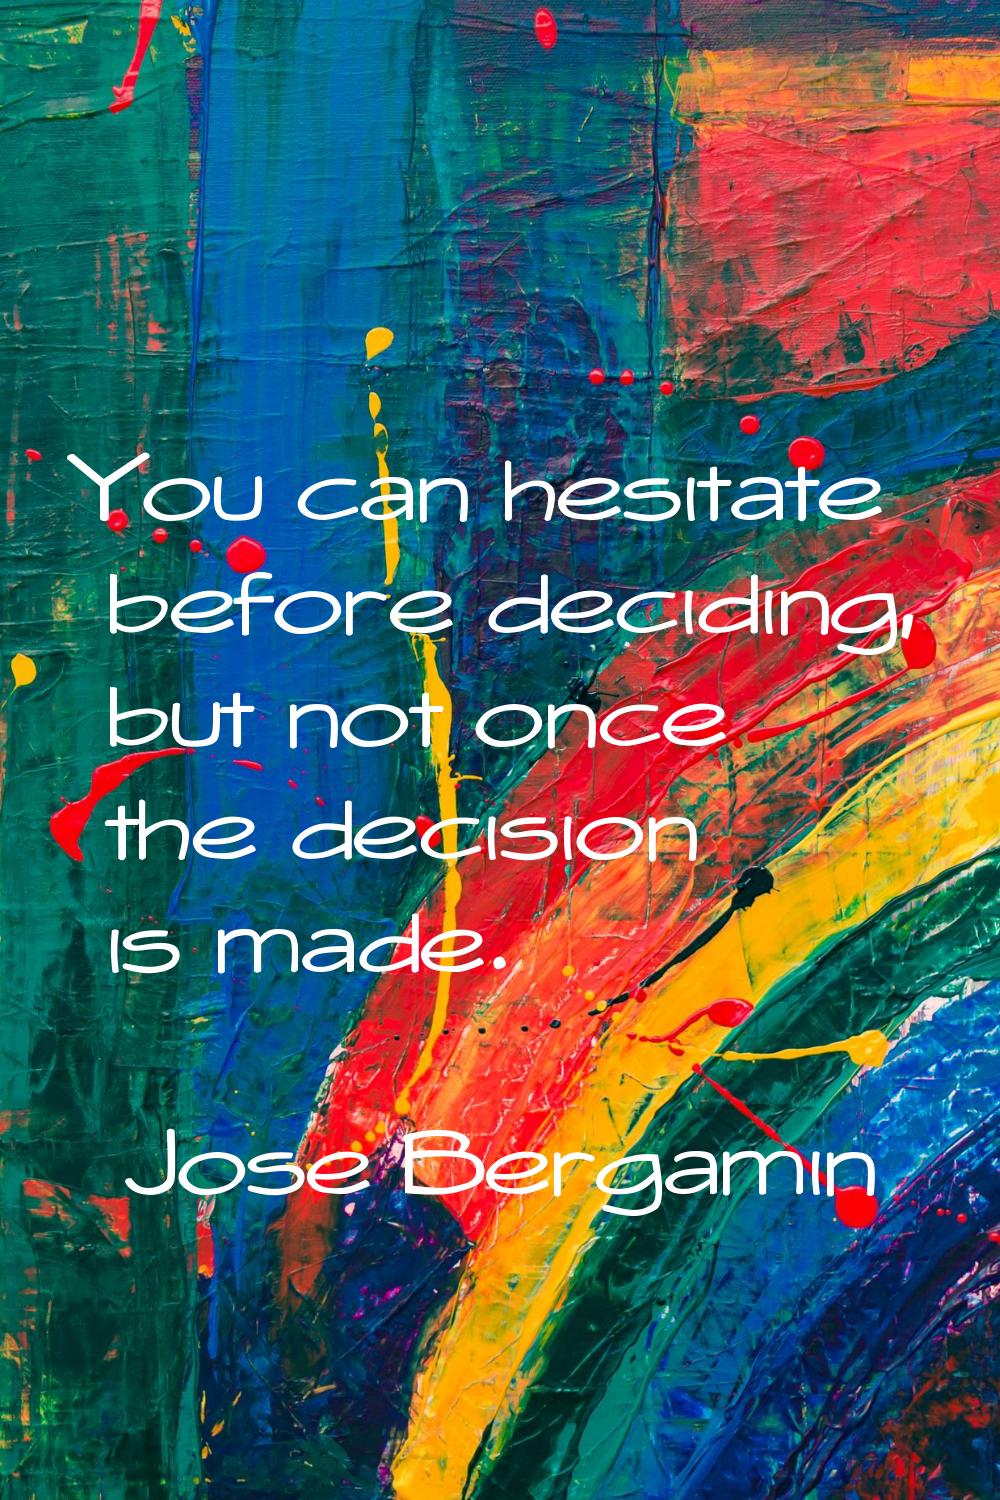 You can hesitate before deciding, but not once the decision is made.